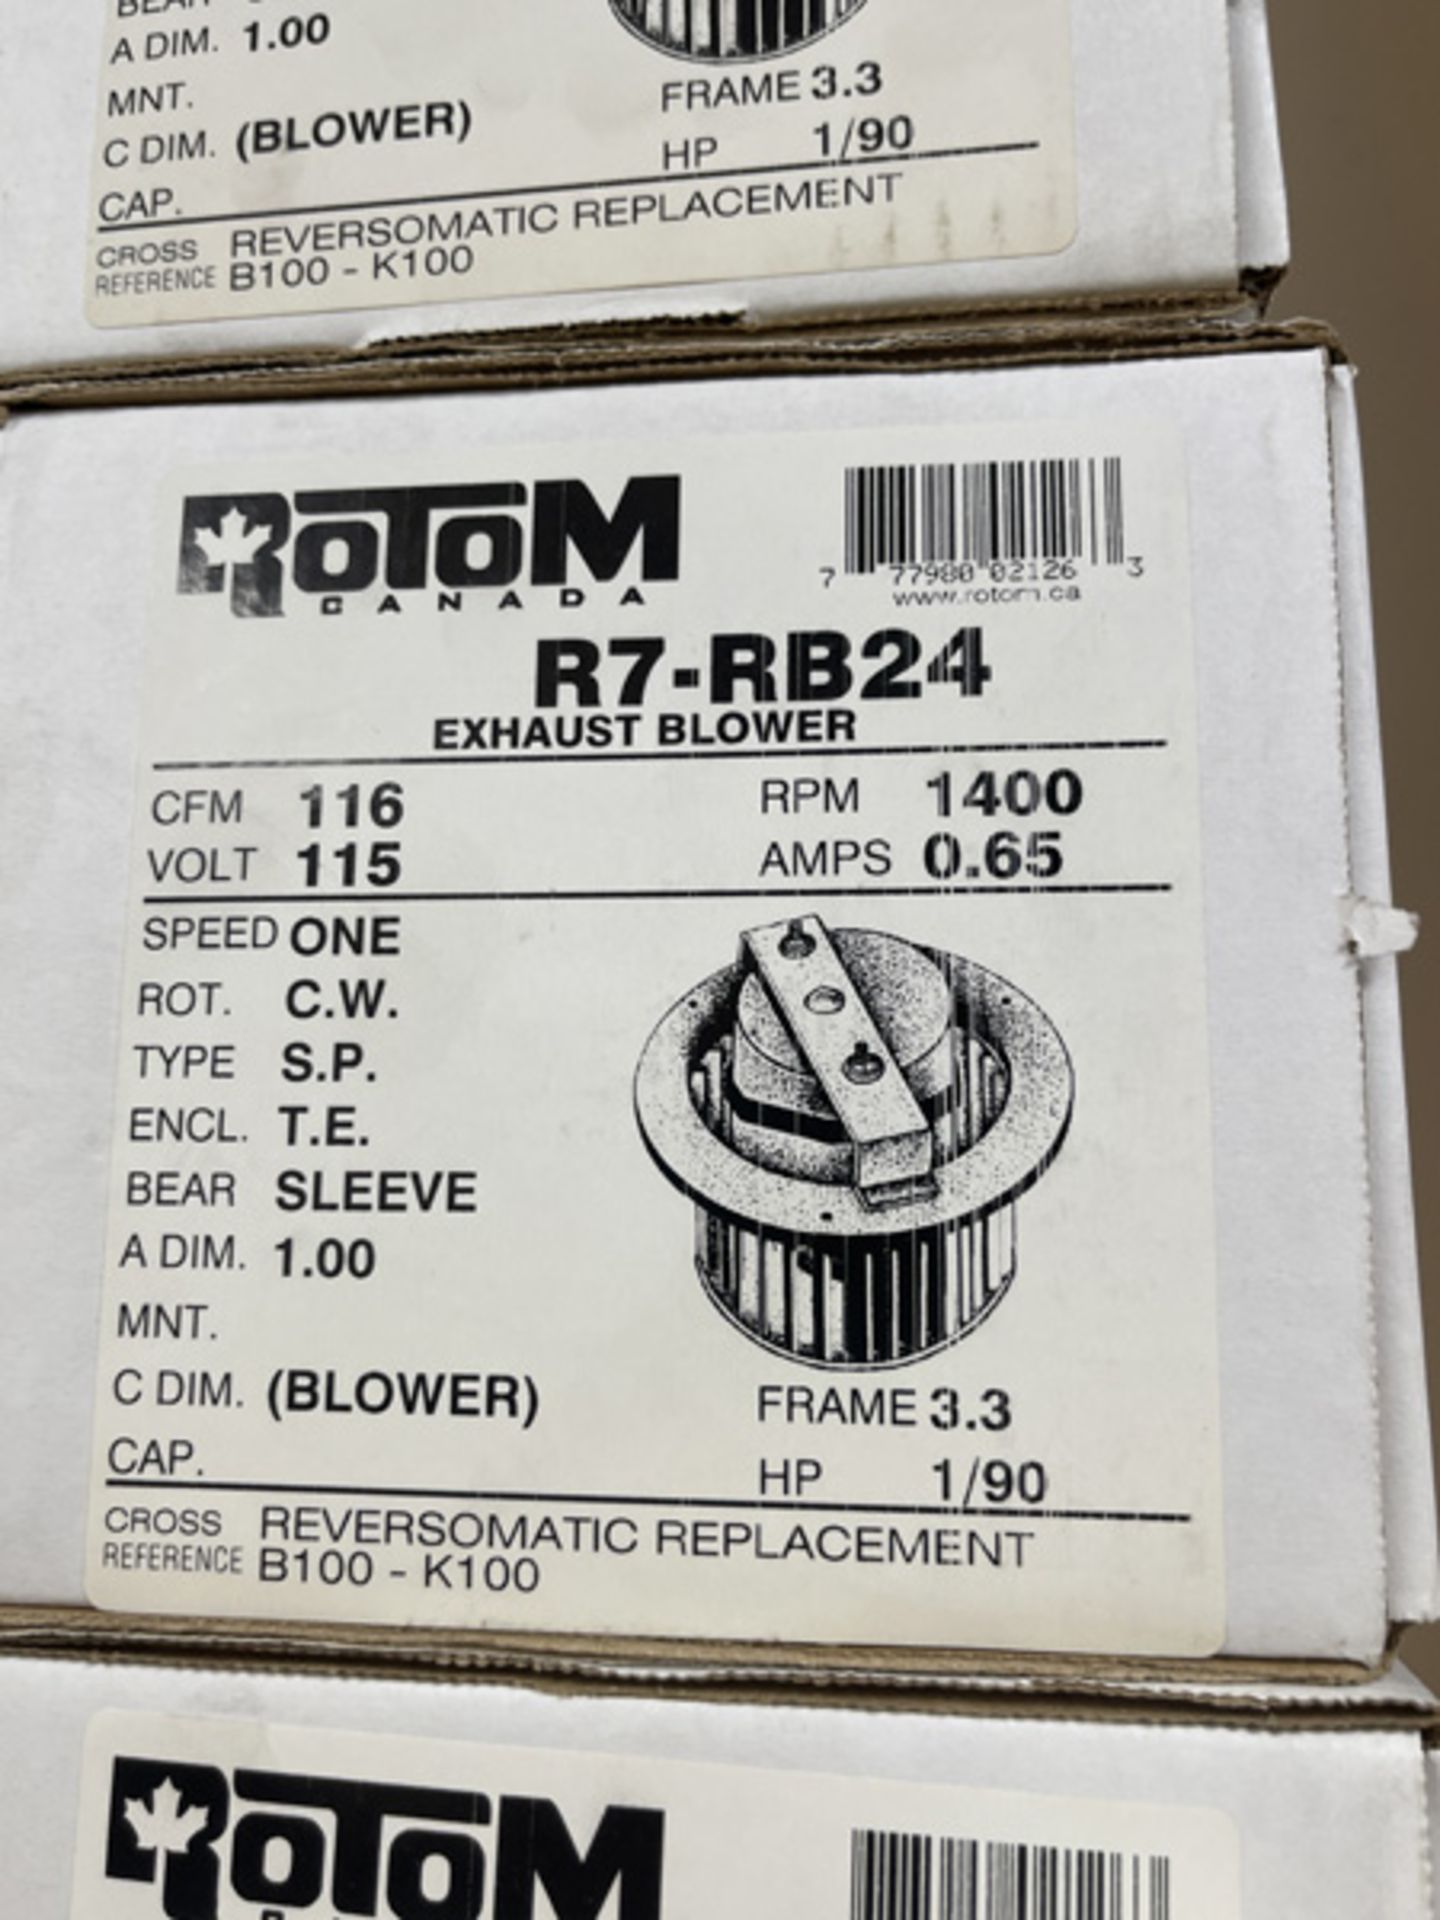 LOT - (12) ROTOM R7-RB24 EXHAUST BLOWERS - 115V, 1400RPM - Image 2 of 2